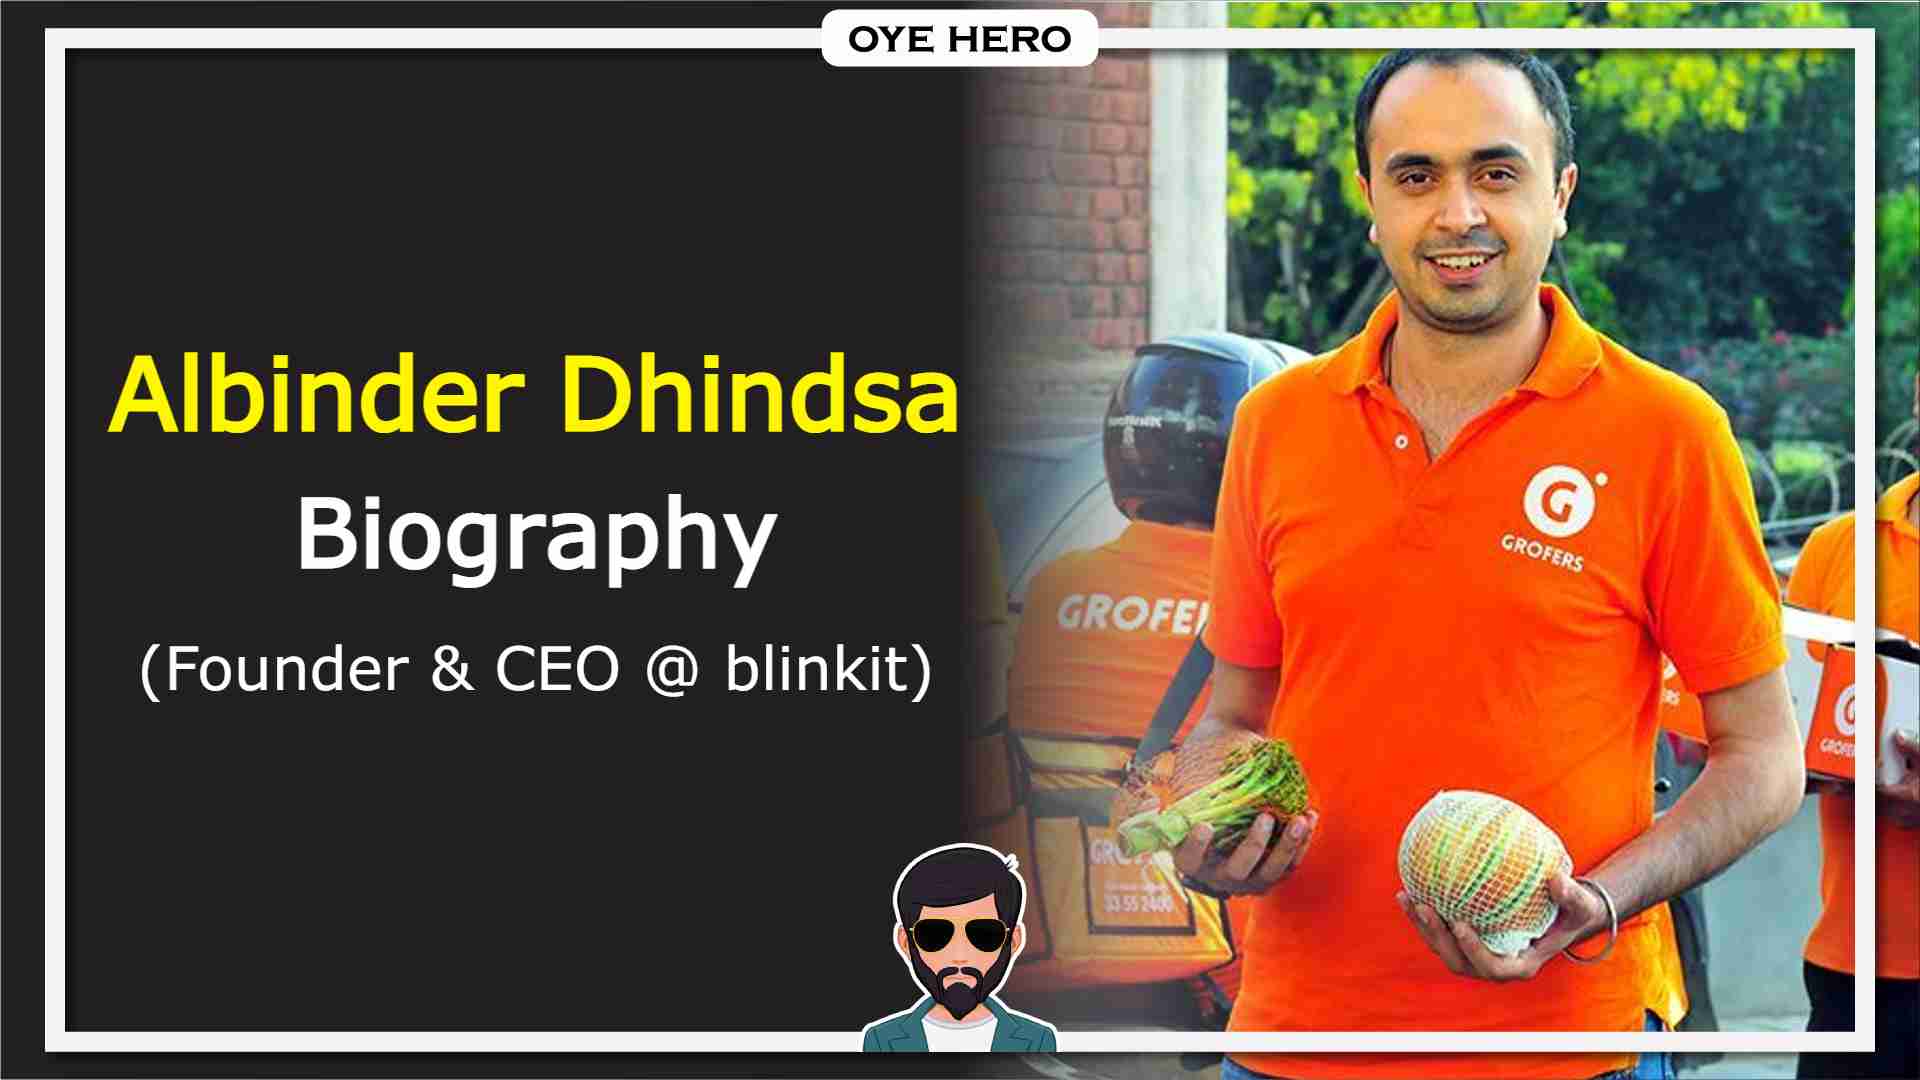 You are currently viewing Albinder Dhindsa Biography & Wikipedia (blinkit Founder & CEO) !!